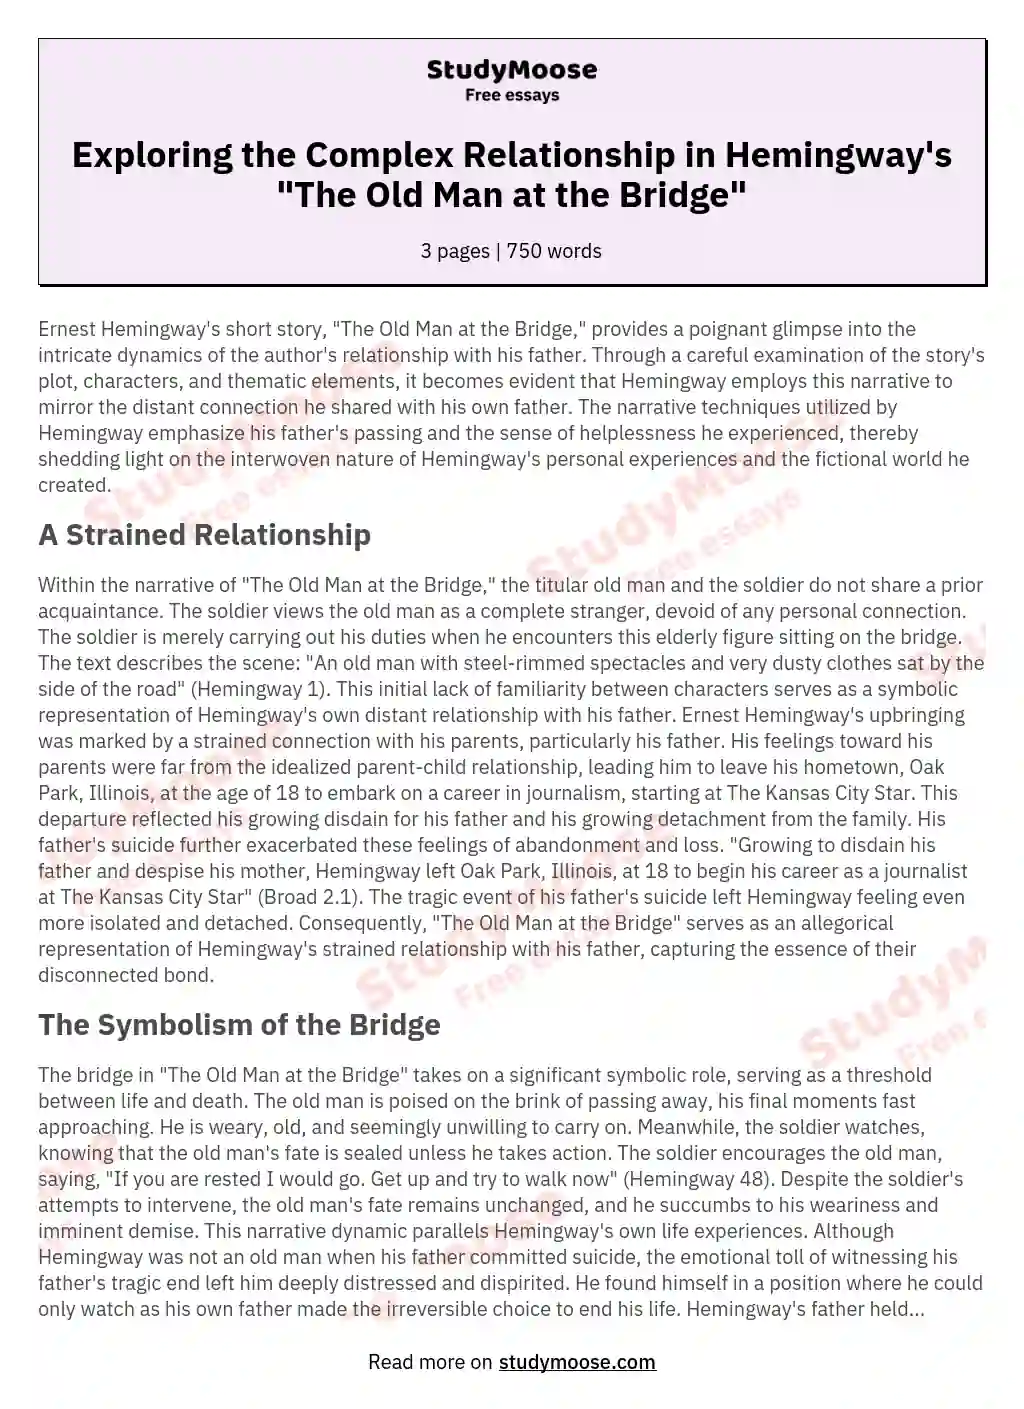 essay of the old man at the bridge